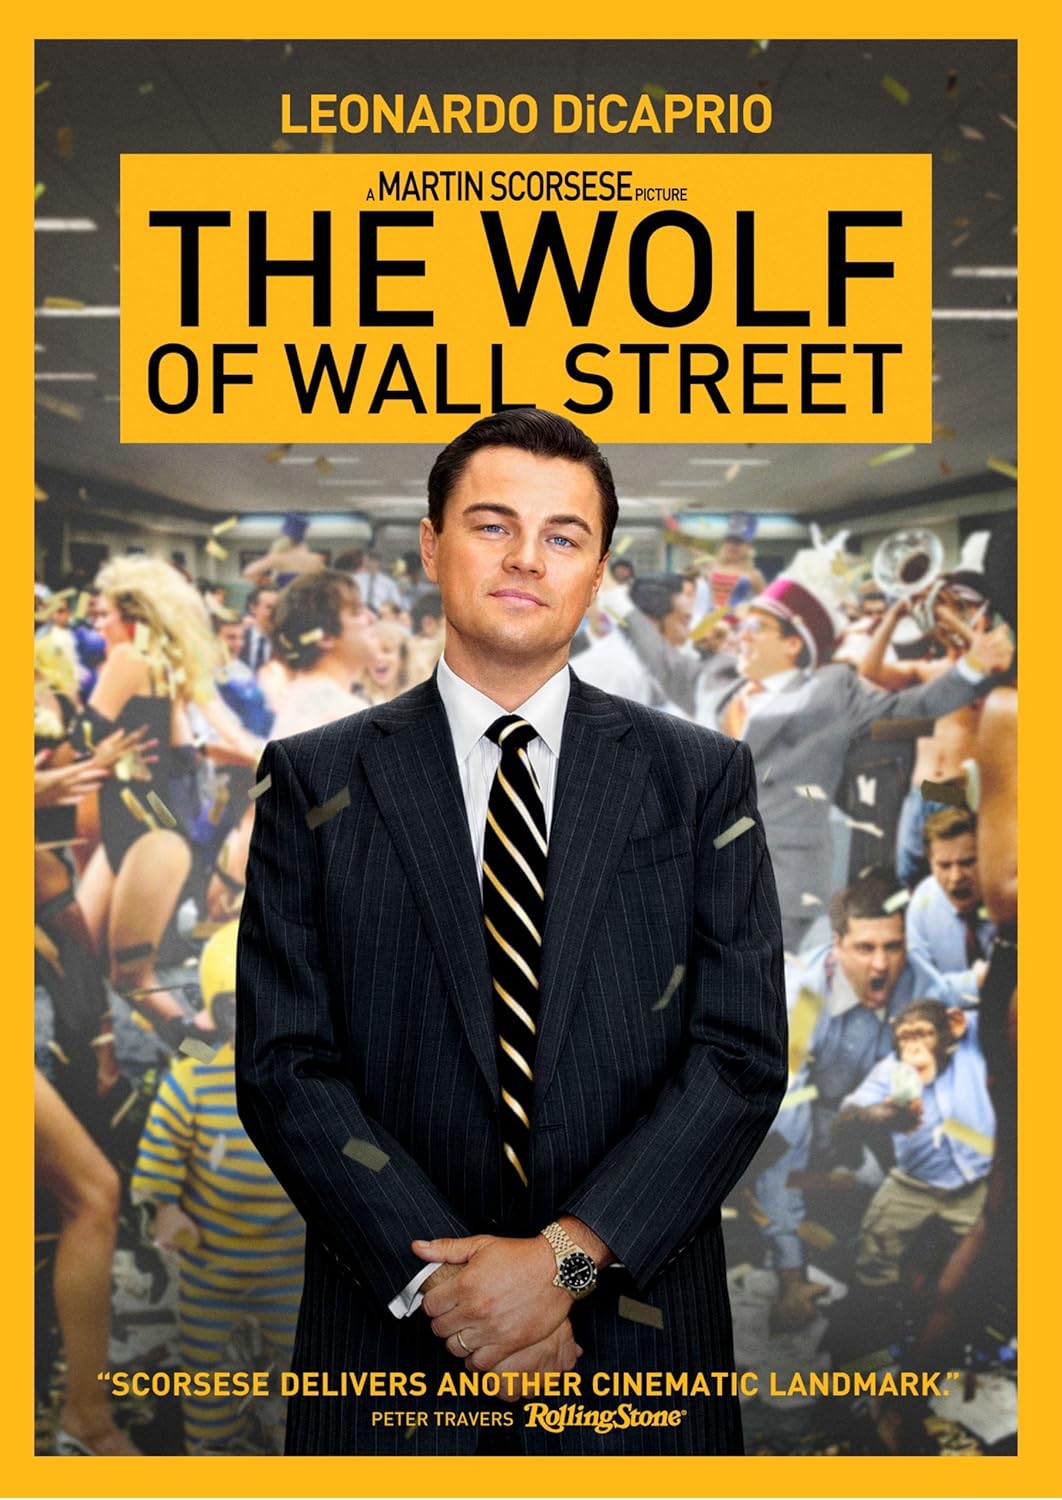 The Wolf of Wall Street on Amazon